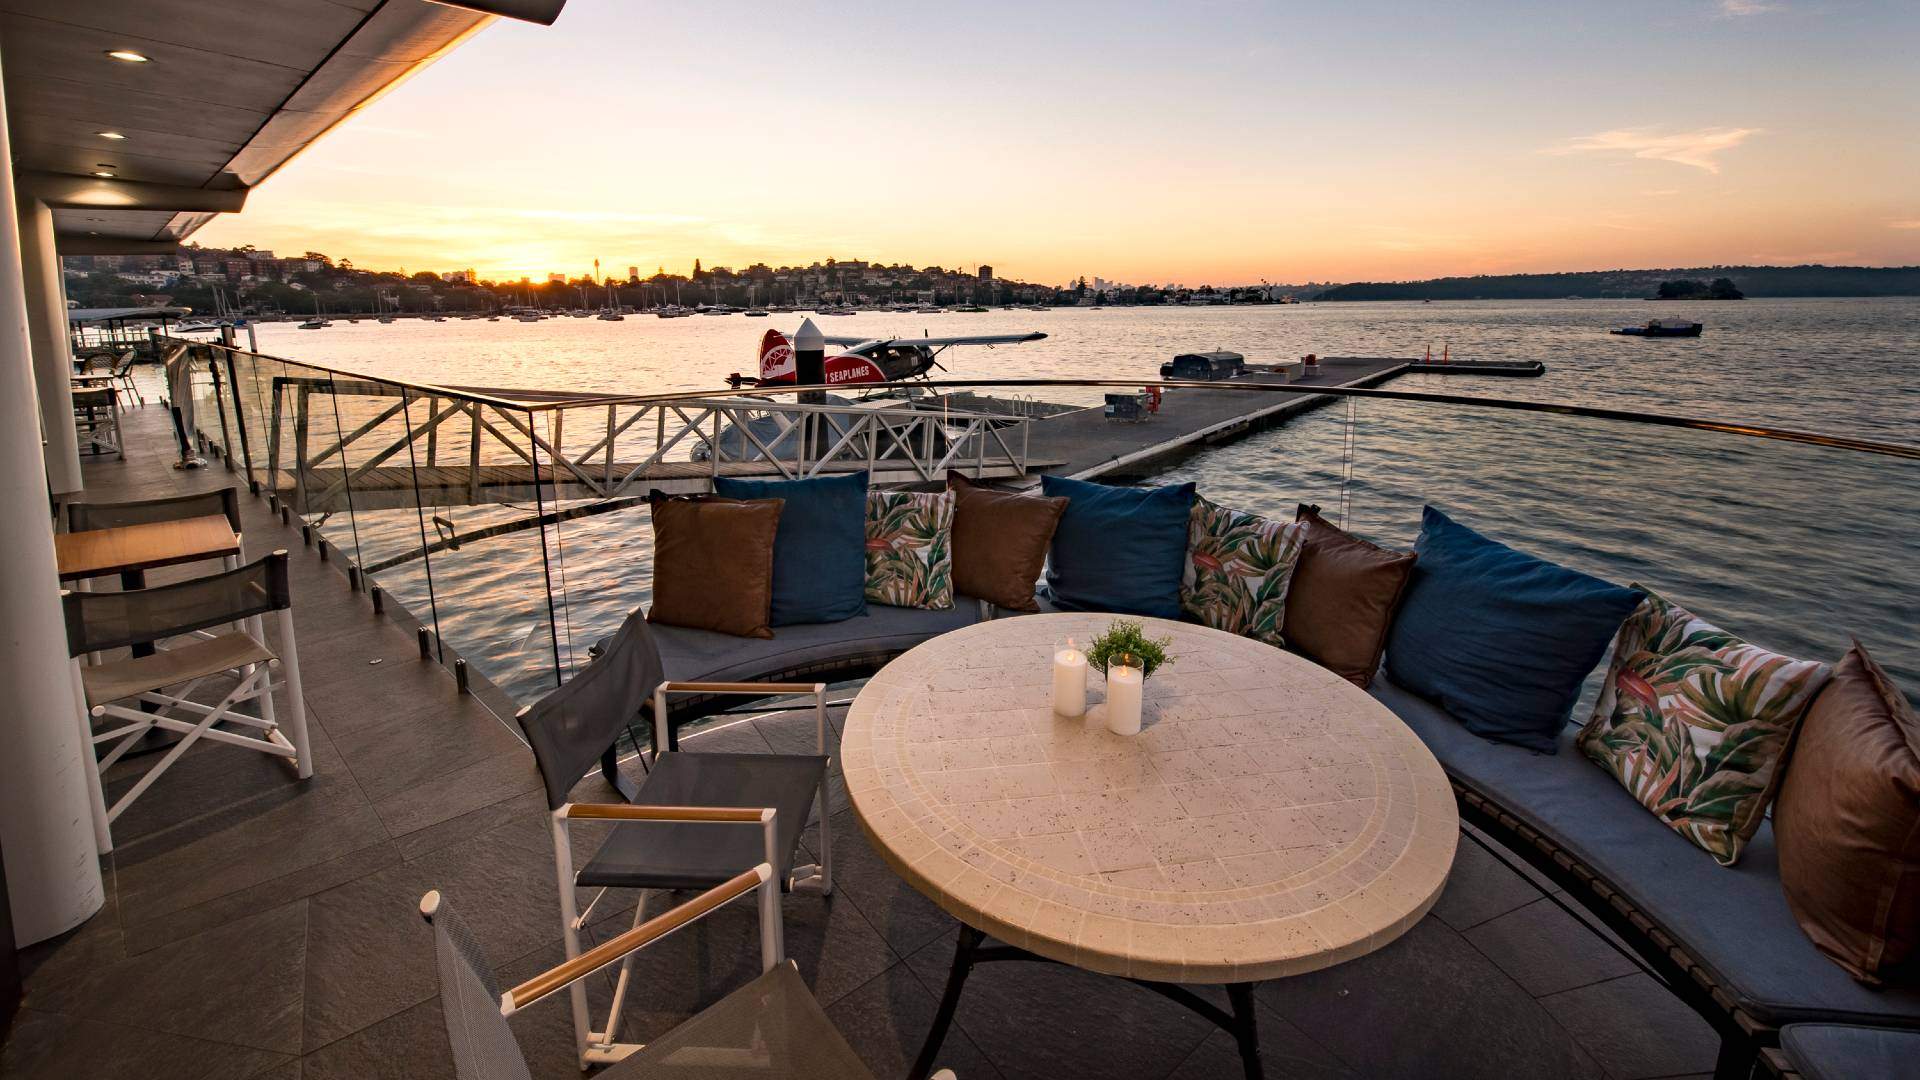 Empire Lounge, Rose Bay Review